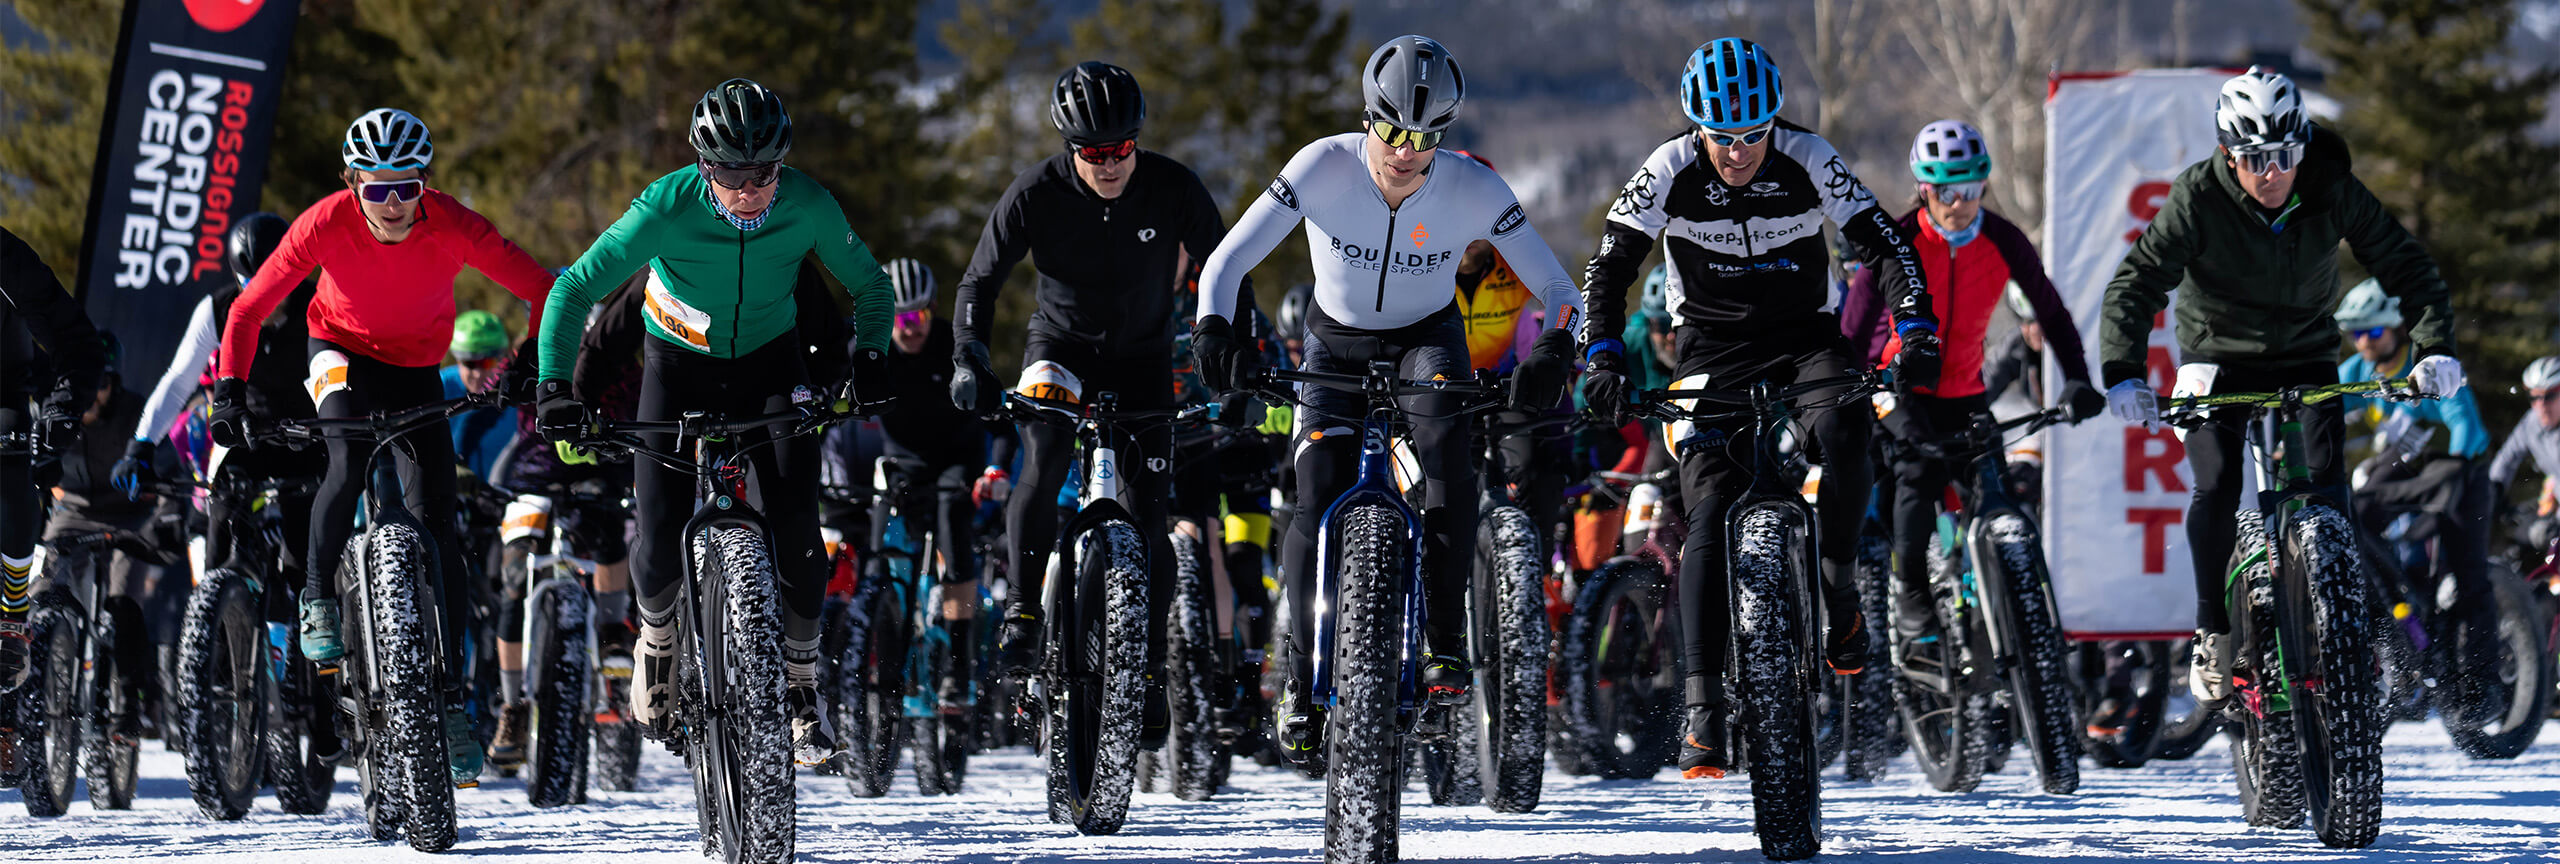 Racers on fat-tire bikes at start line of Frisco Freeeze Fatbike Race